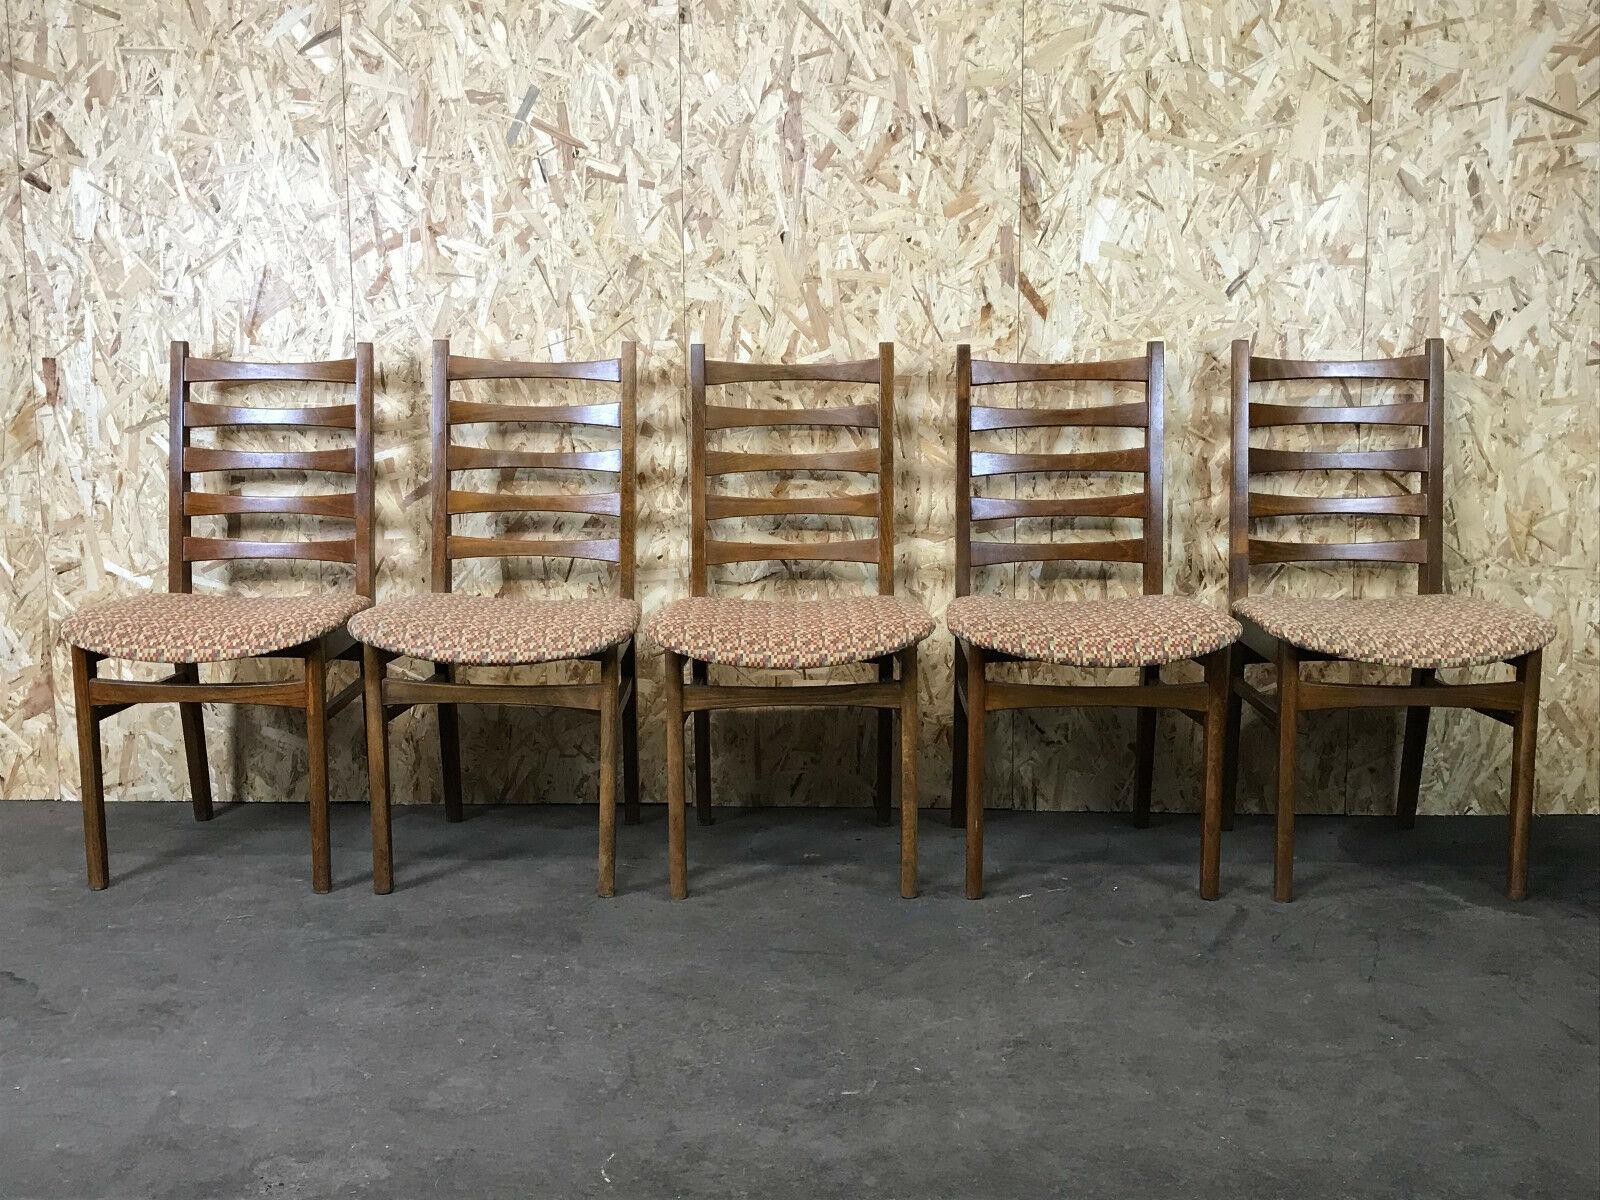 5x 60s 70s chairs dining chair dining chairs Danish design 60s

Object: 5x chair

Manufacturer:

Condition: good

Age: around 1960-1970

Dimensions:

46cm x 55cm x 90.5cm
Seat height = 43cm

Other notes:

The pictures serve as part